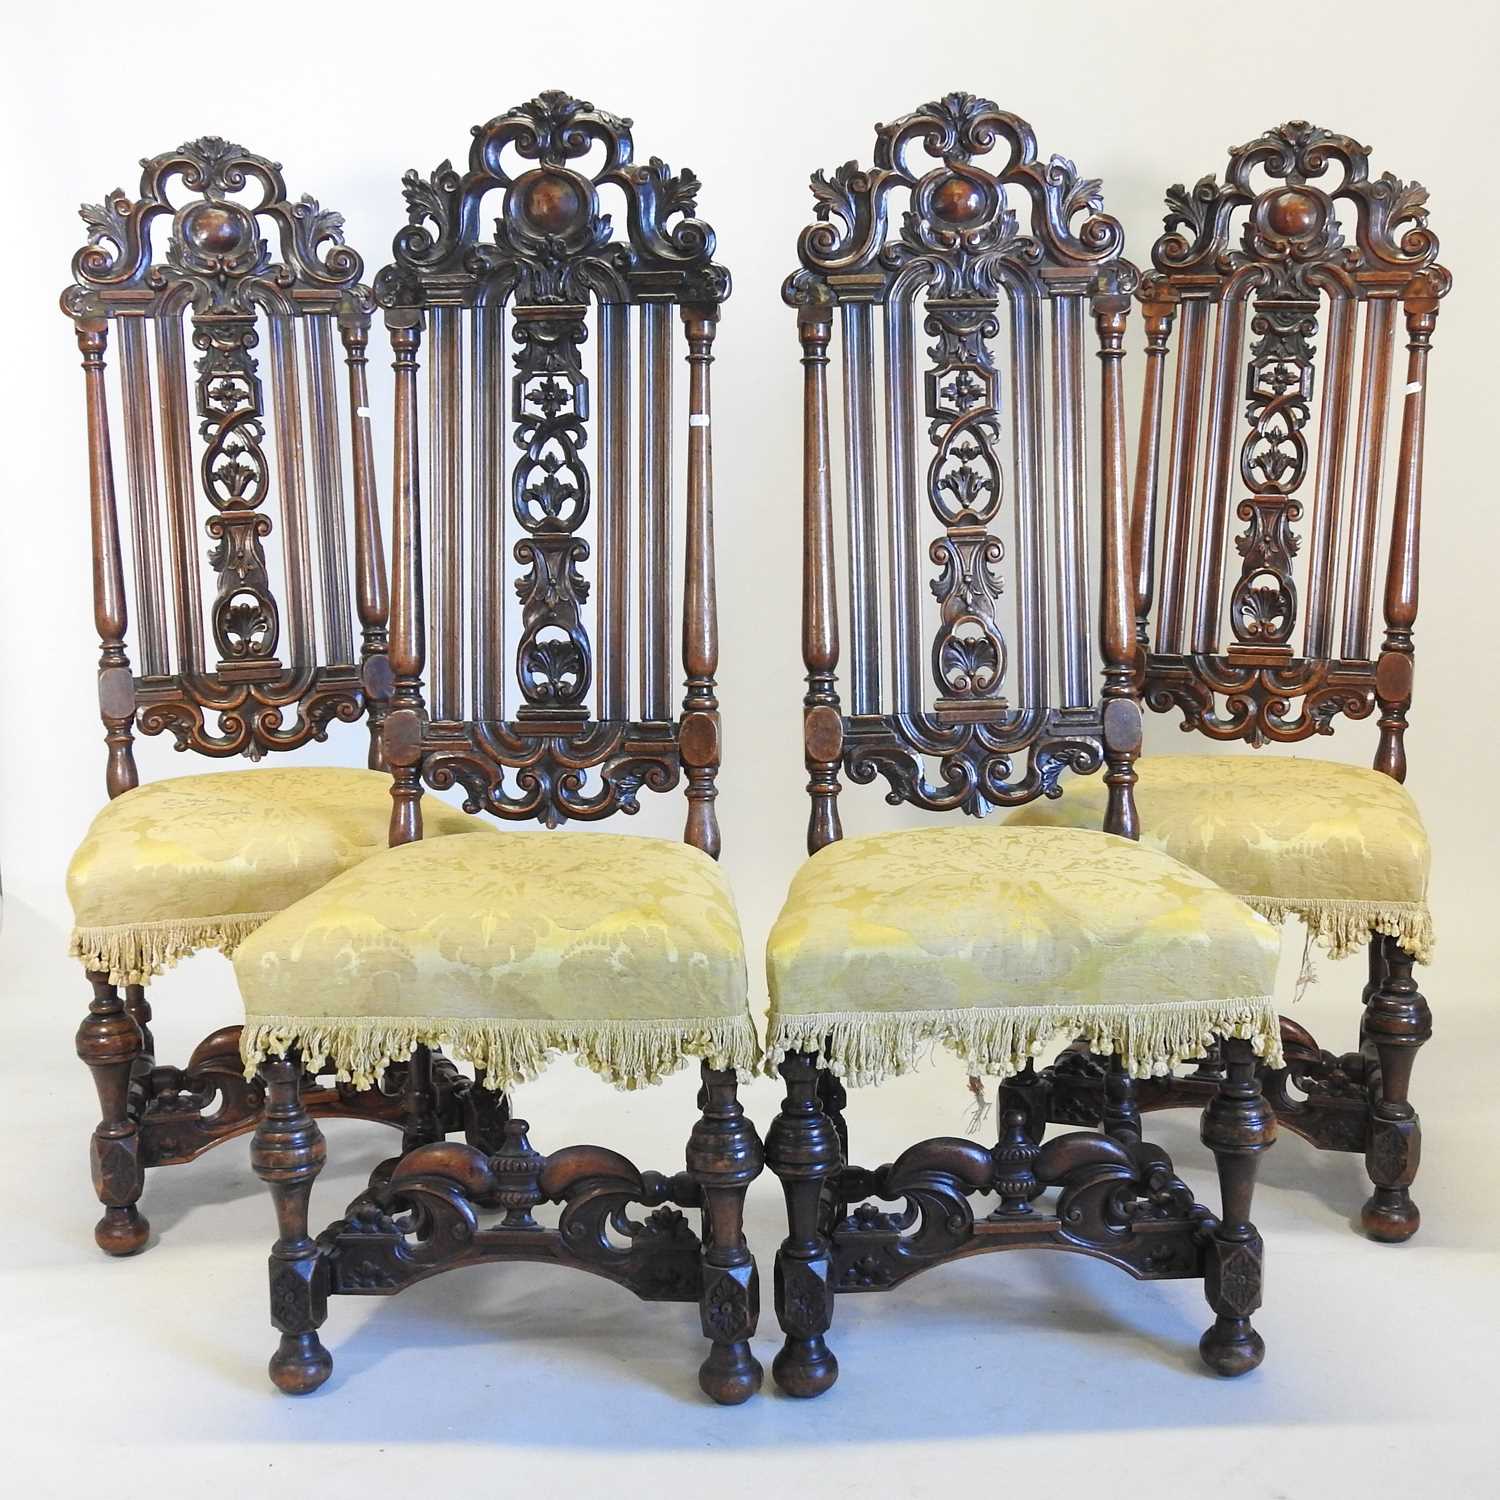 A set of four 17th century style Anglo-Dutch high back dining chairs